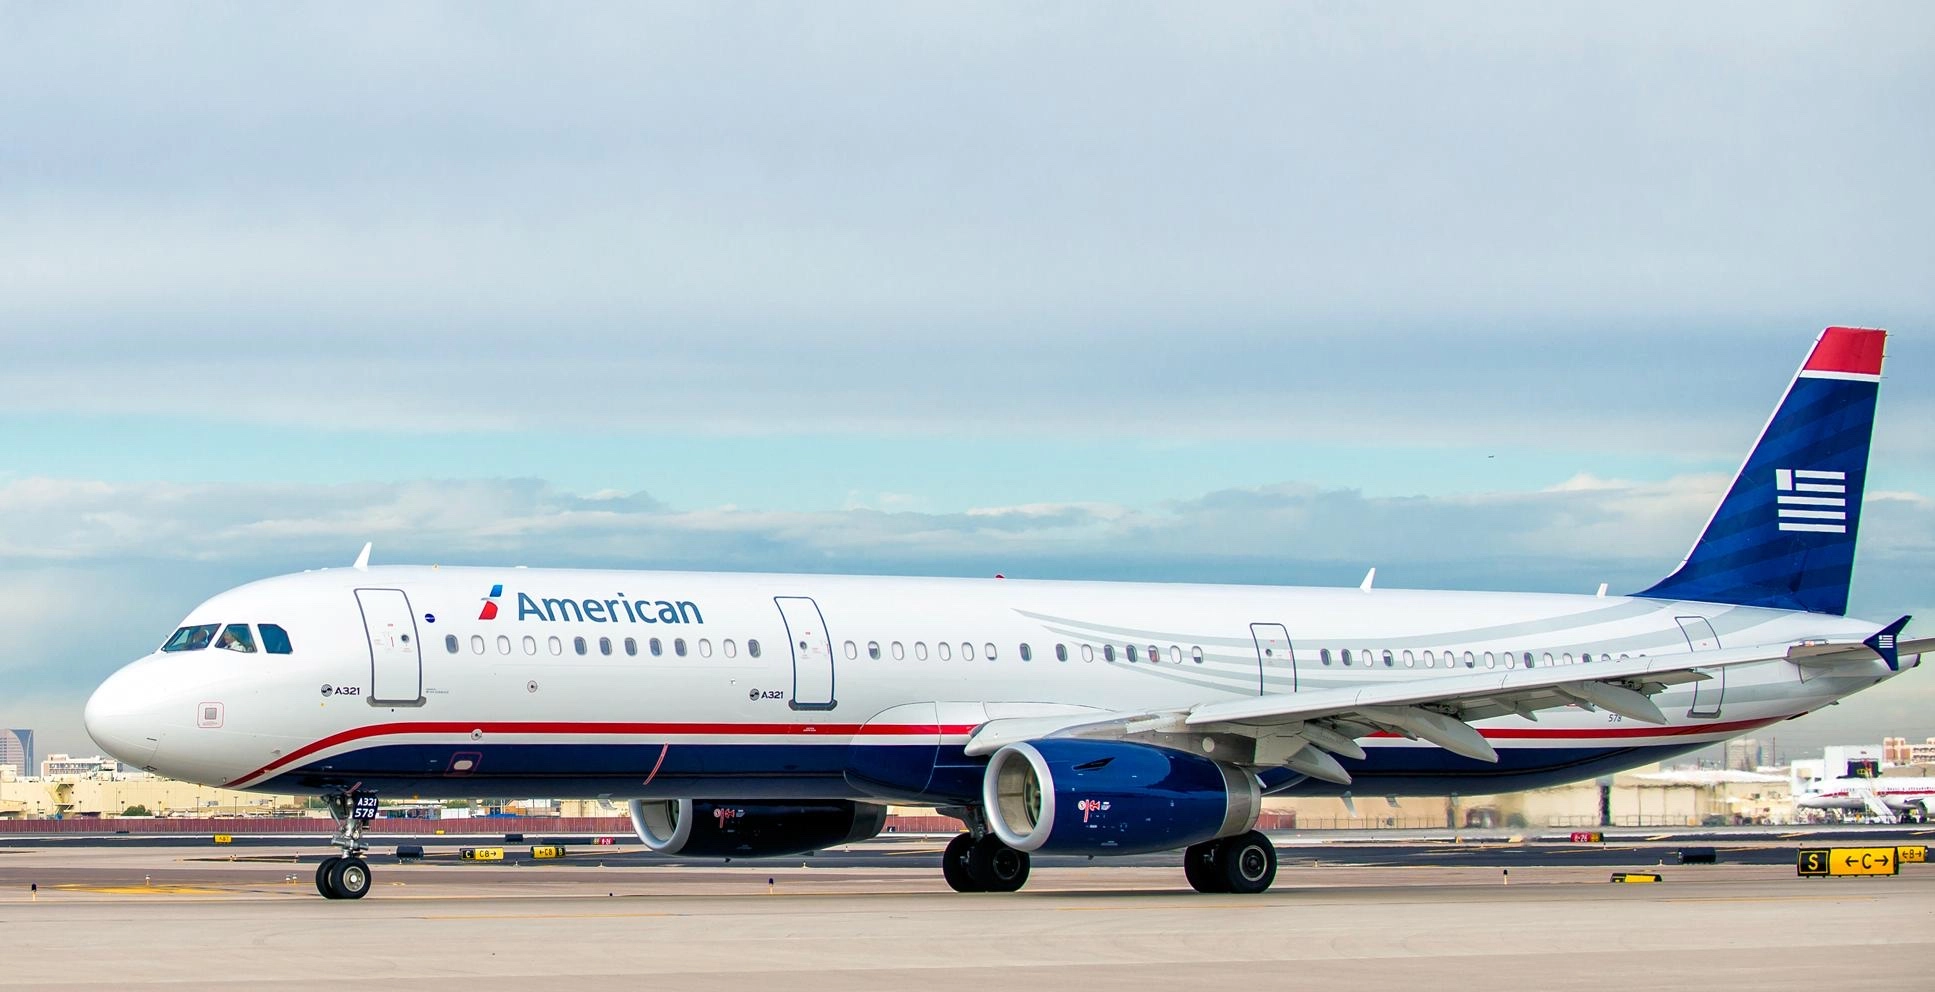 US Airways was acquired by American Airlines and joined Oneworld. American kept a US Airways livery to commemorate the airline.